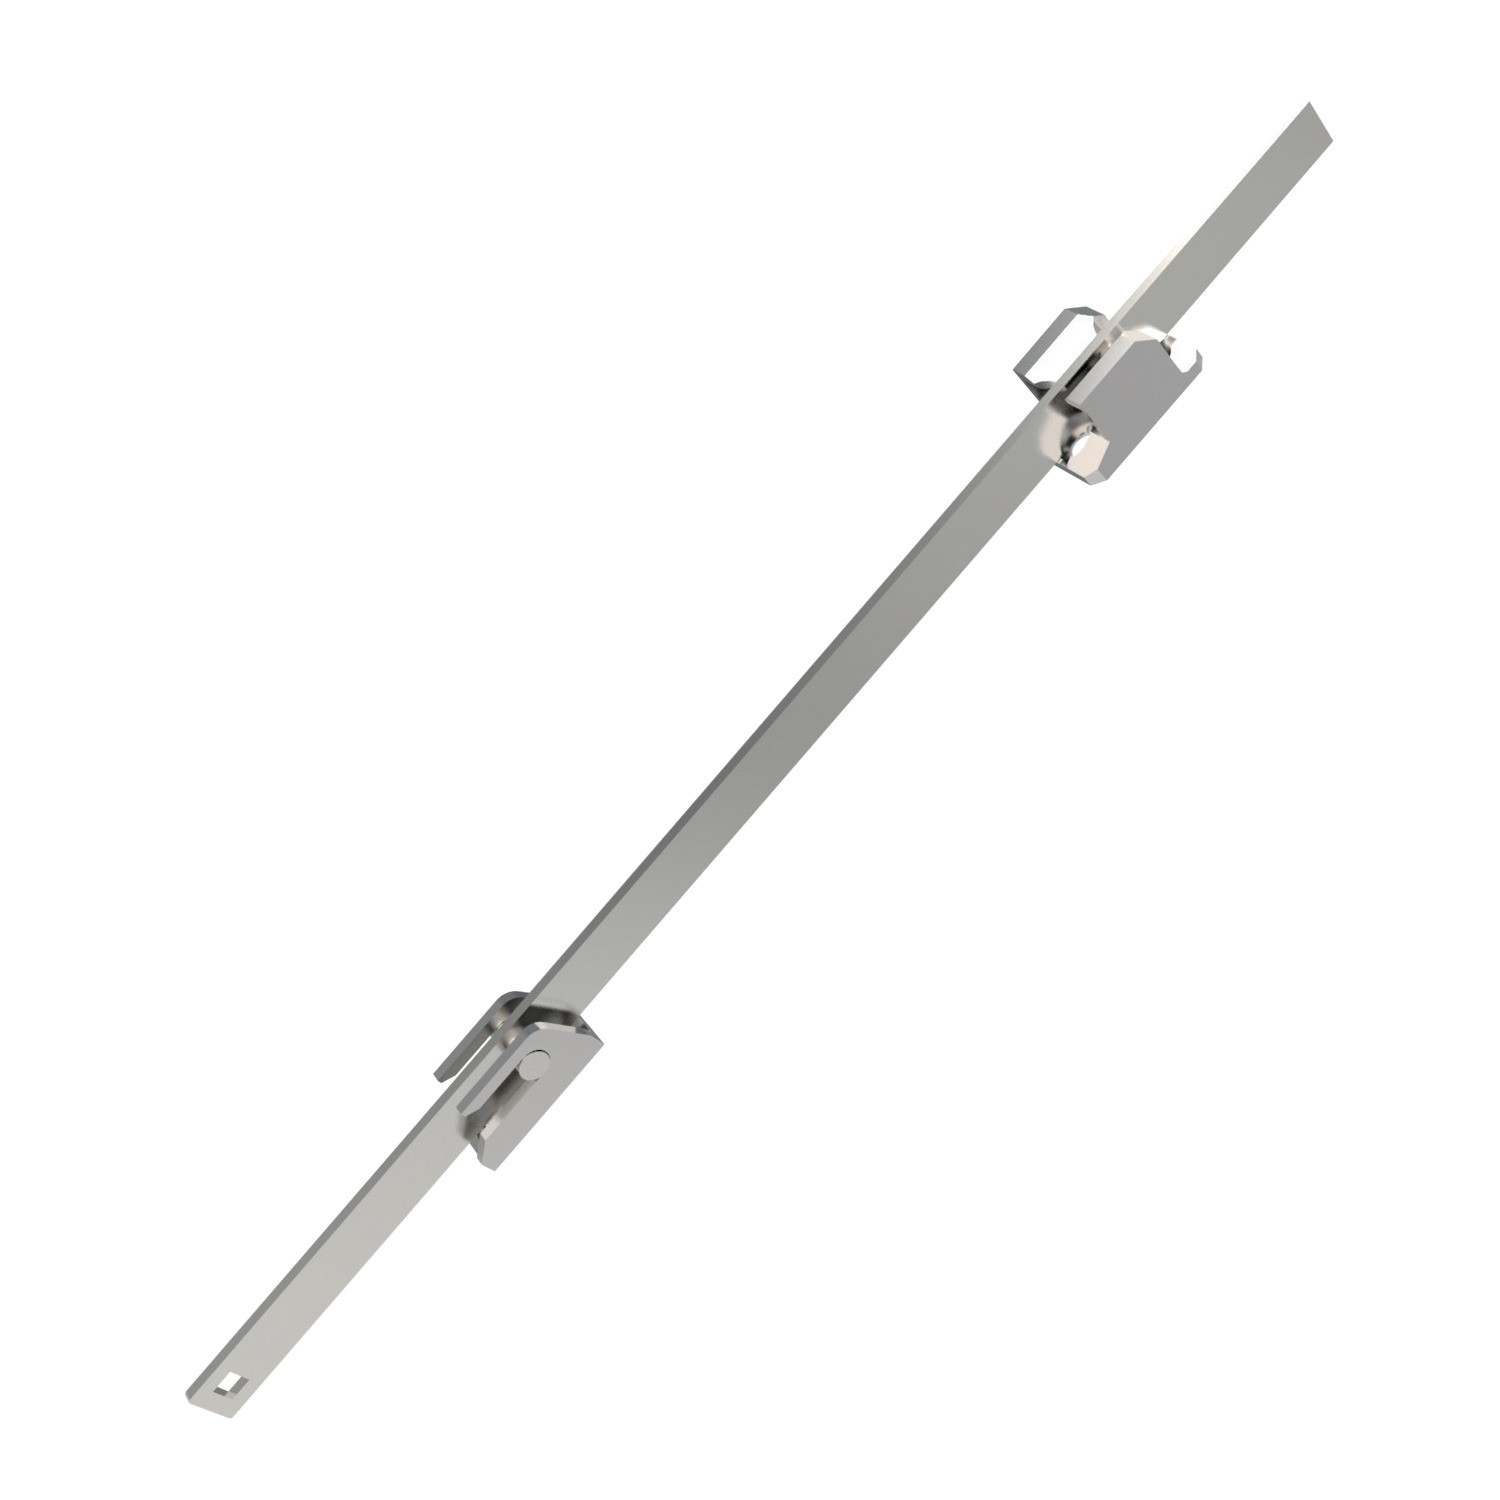 Product A0325, Multi-Point Latching Set flat rod with locking pins - for cam latches and swing handles / 